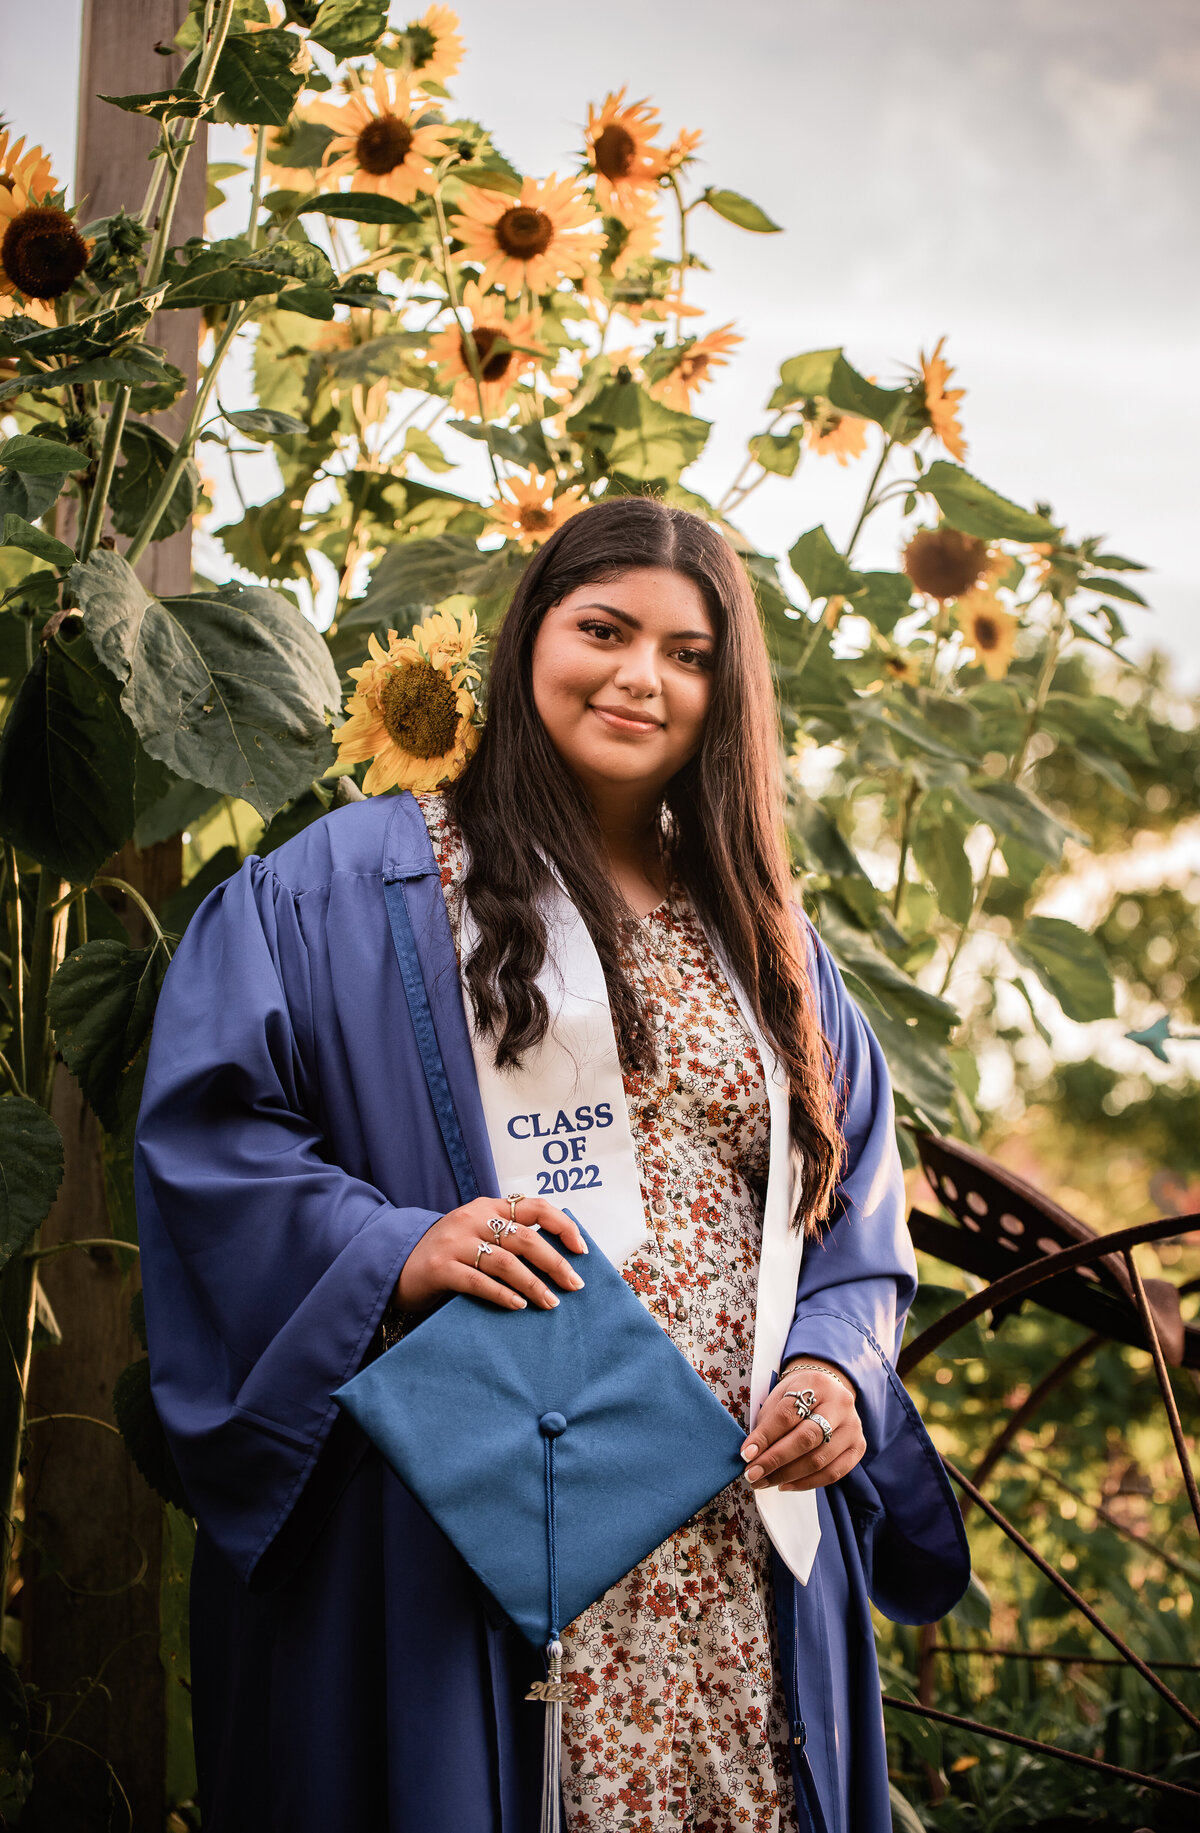 A senior wearing a blue cap and gown stands in front of sunflowers.